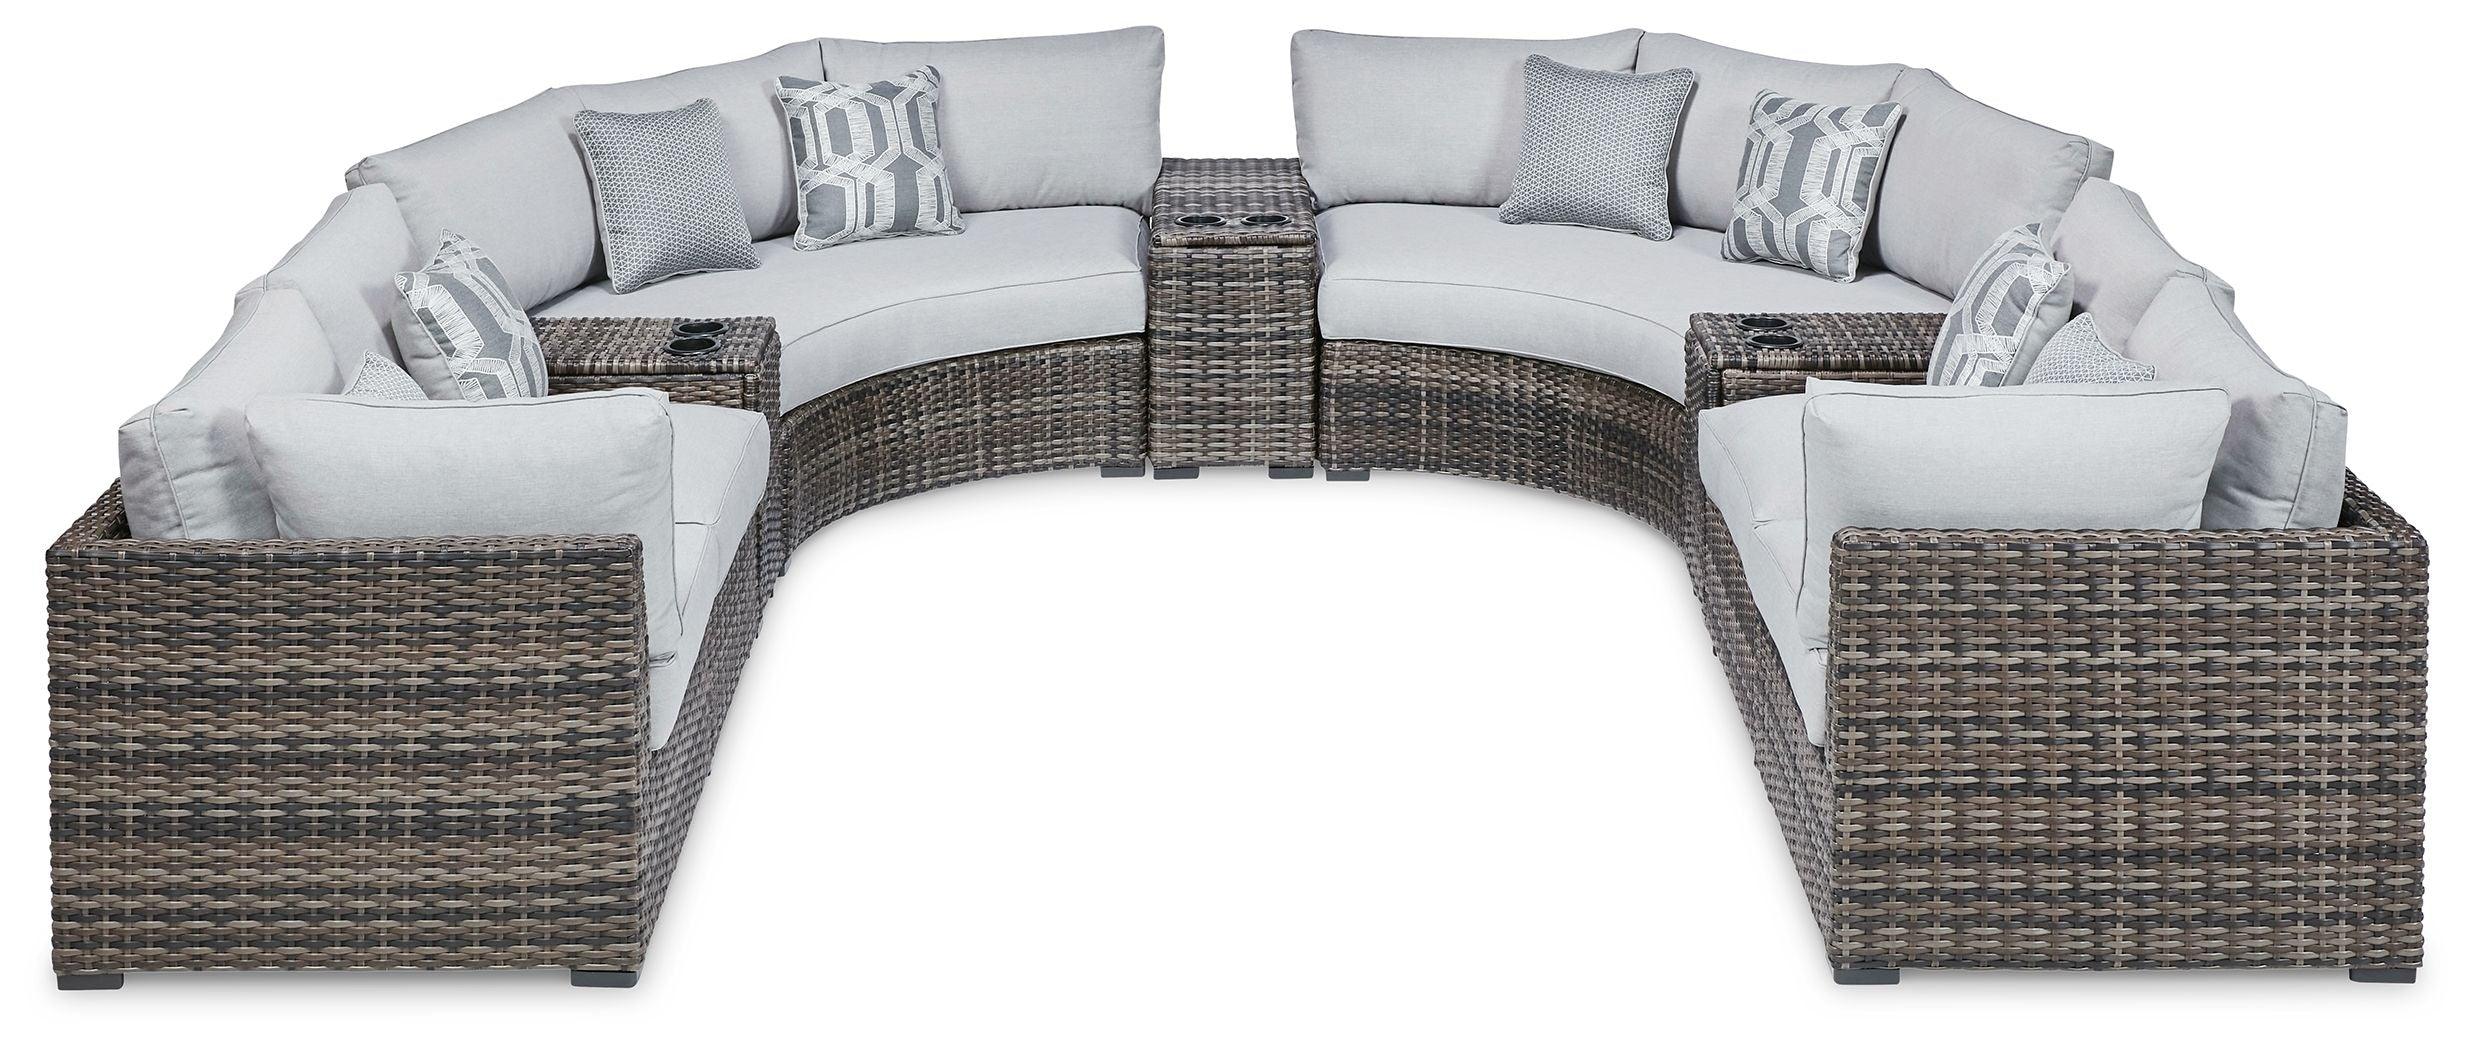 Signature Design by Ashley® - Harbor Court - Gray - 9-Piece Outdoor Sectional - 5th Avenue Furniture